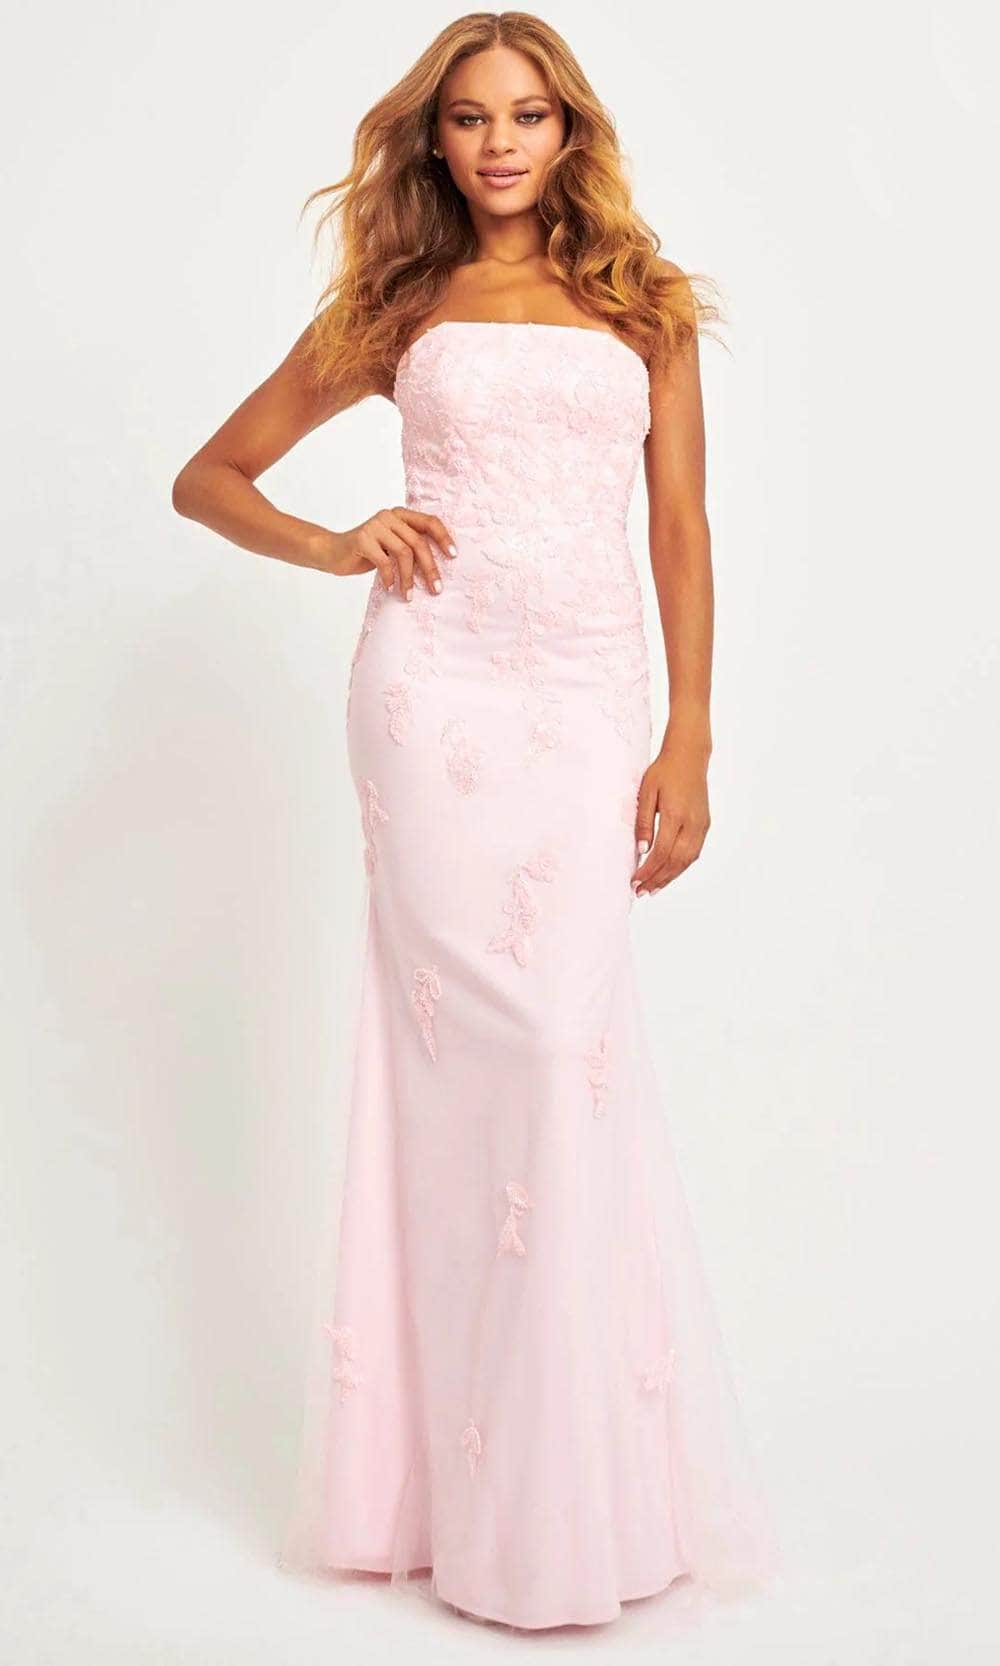 Faviana 11004 - Strapless Applique Prom Gown
